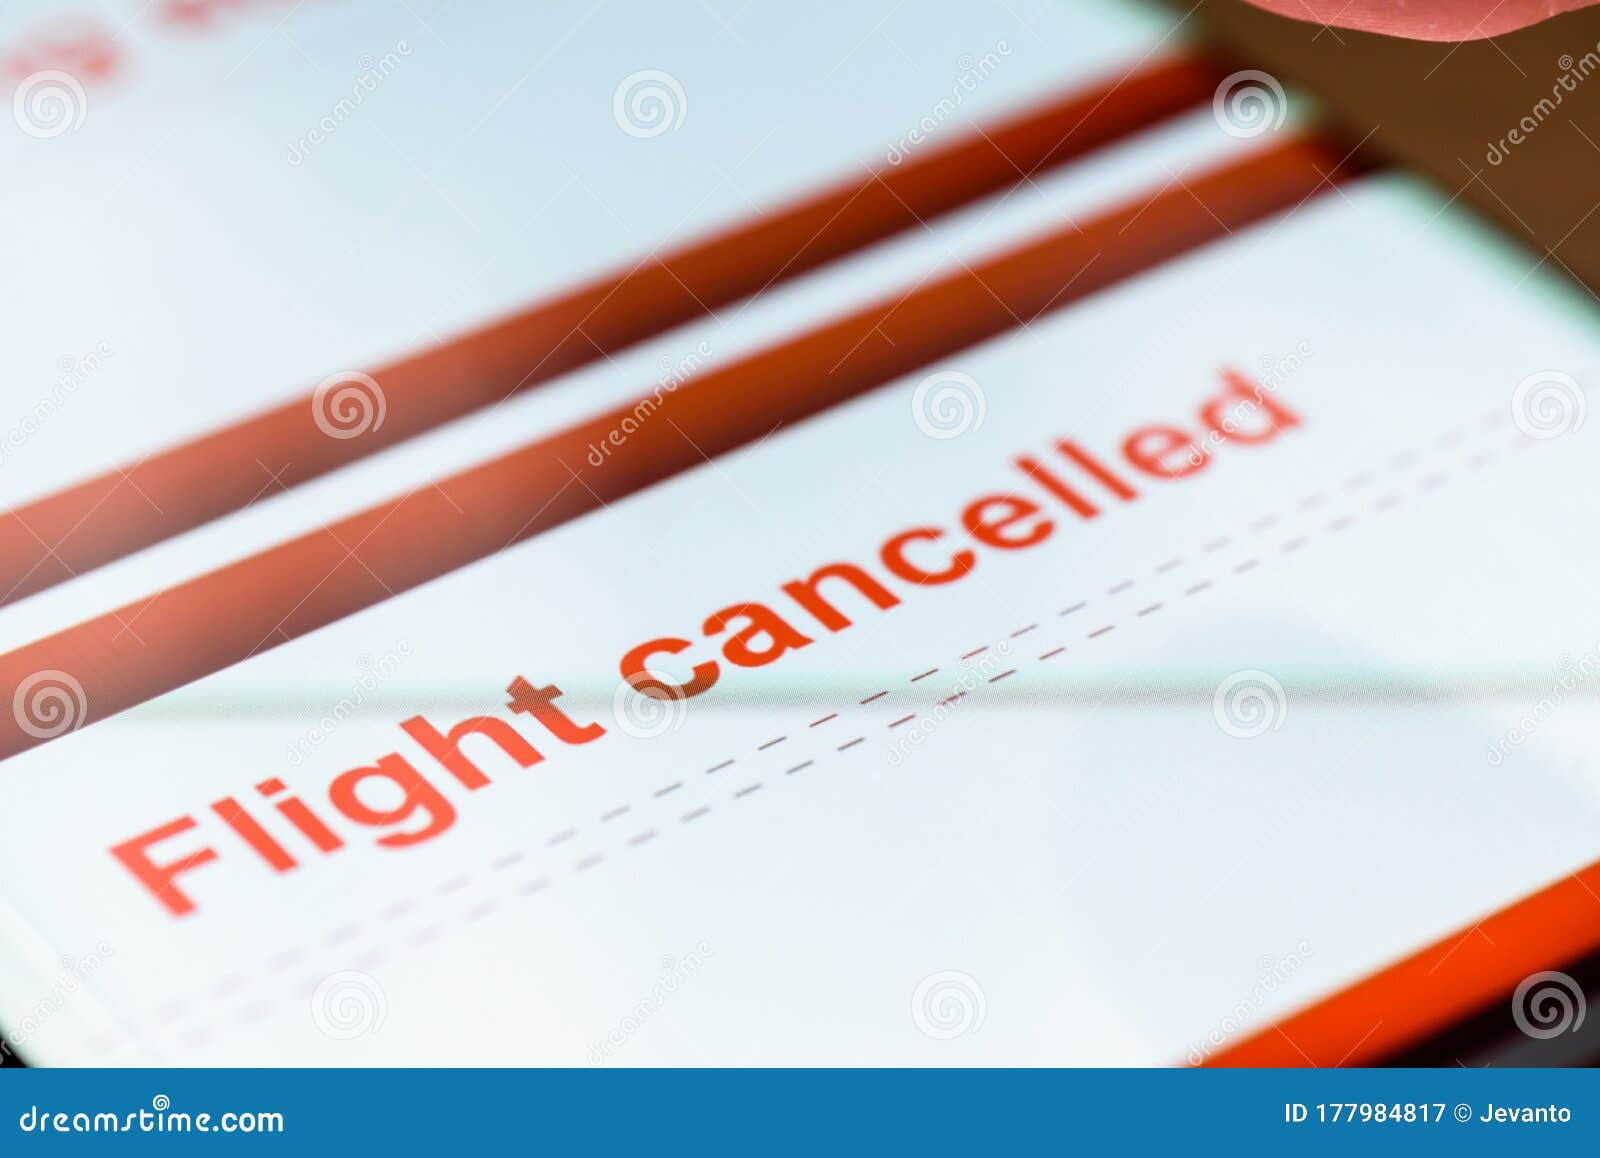 Cancellation flight from BIL to BUF by phone